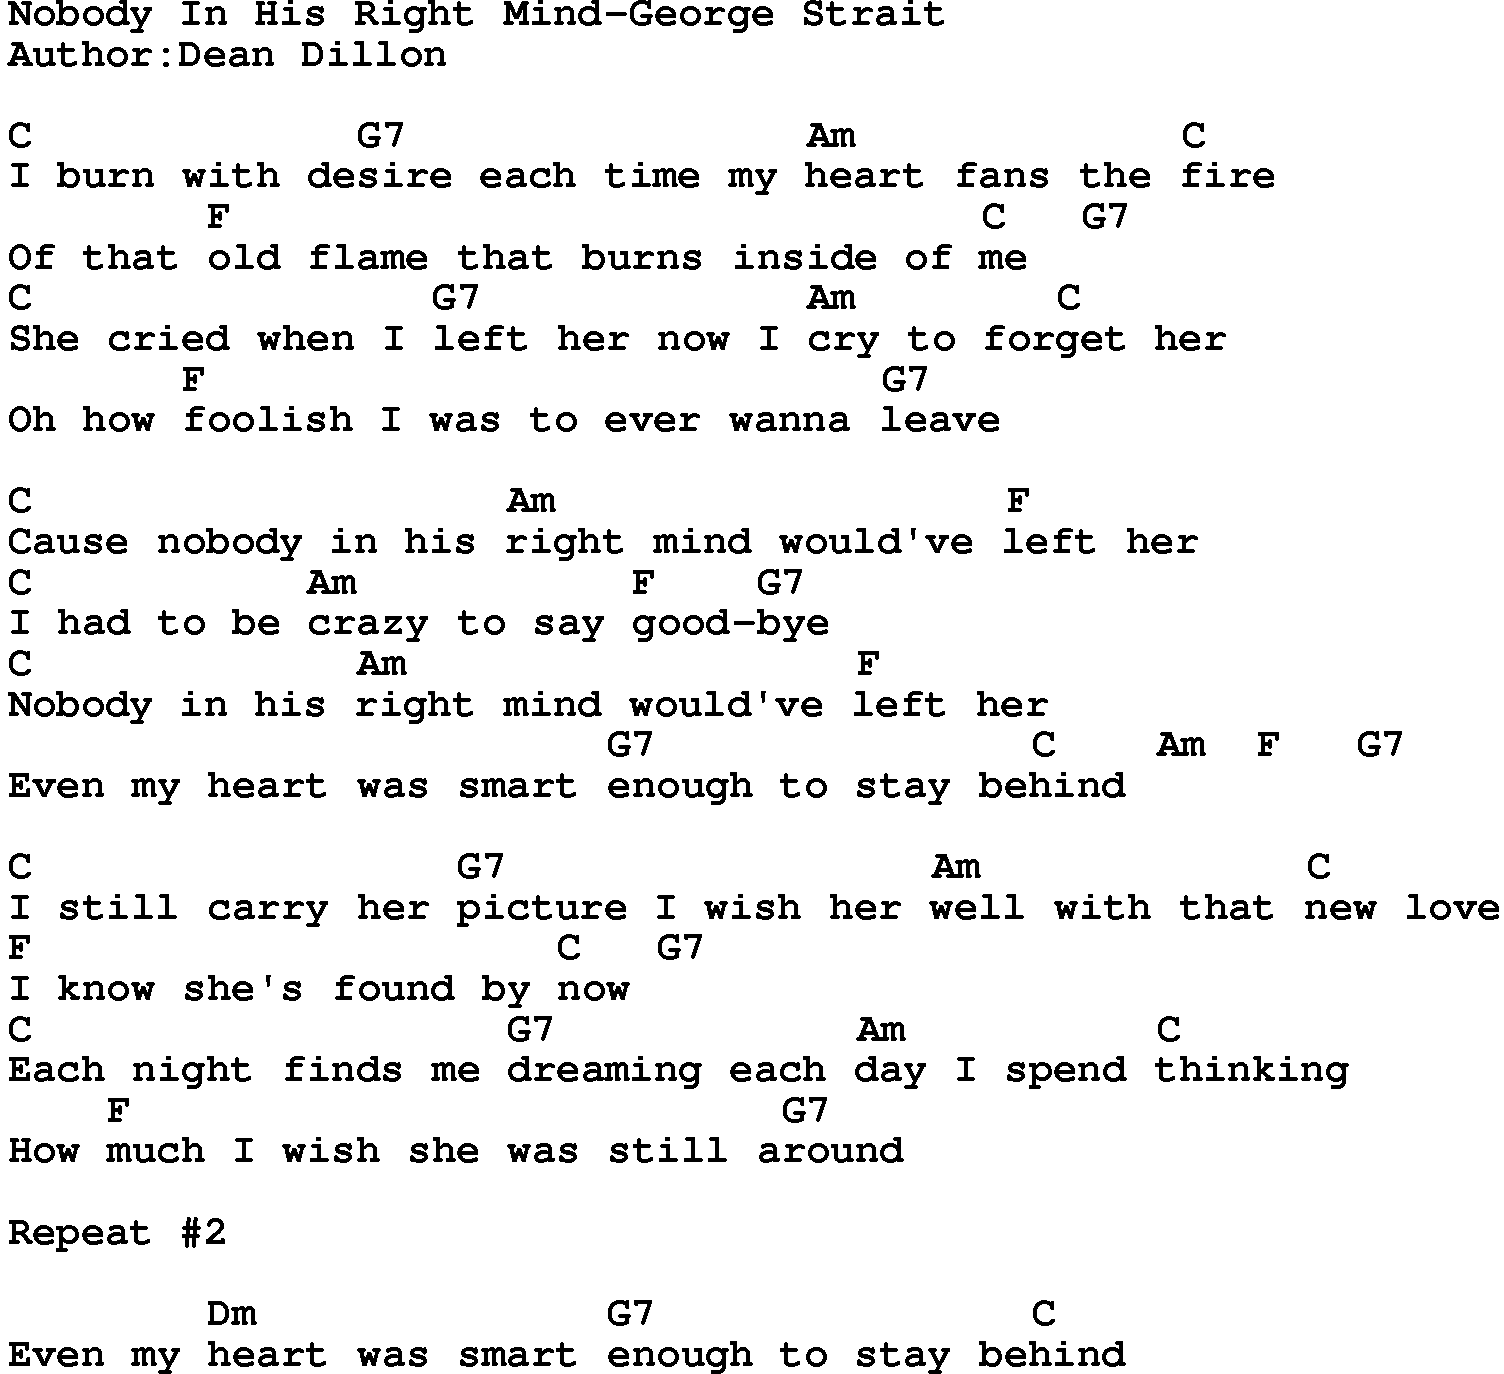 Country music song: Nobody In His Right Mind-George Strait lyrics and chords